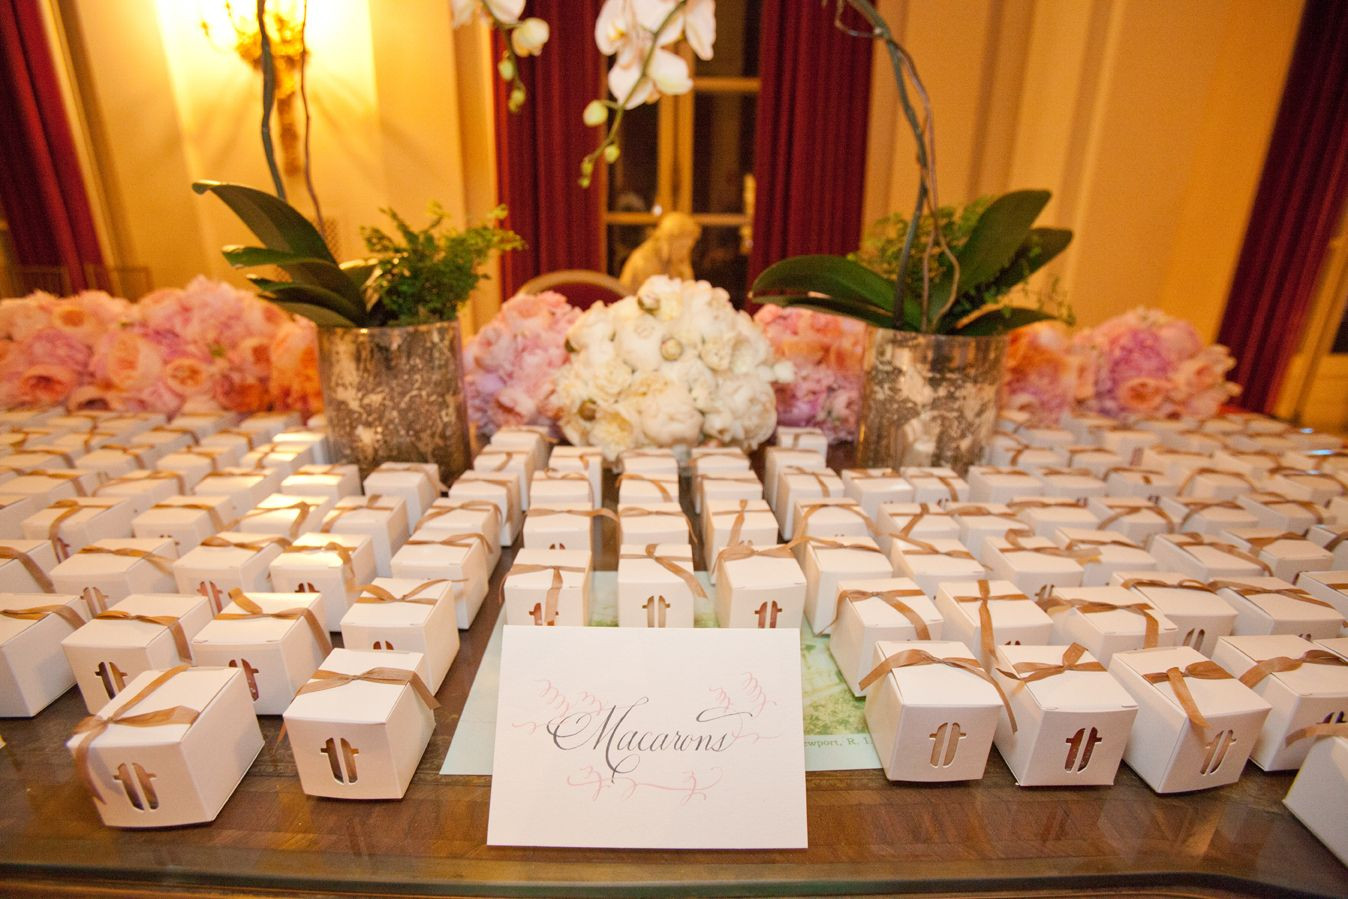 Pi Day Wedding Gifts
 gorgeous table setup and cute boxes to give away goo s